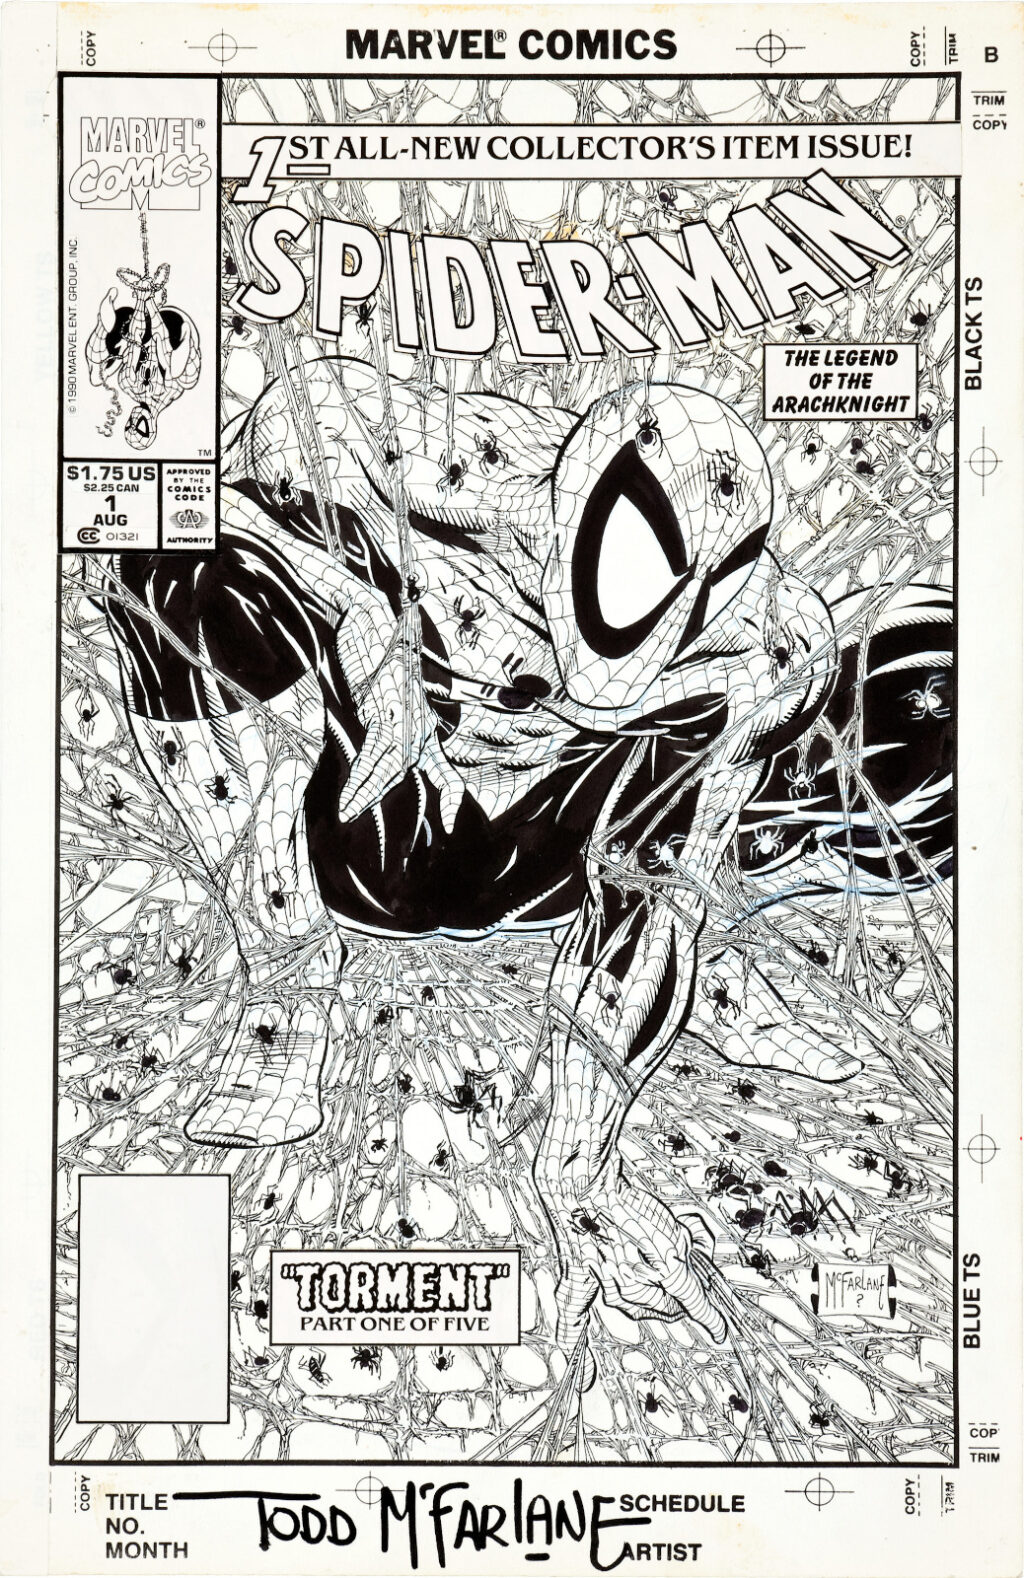 Spider Man issue 1 cover by Todd McFarlane